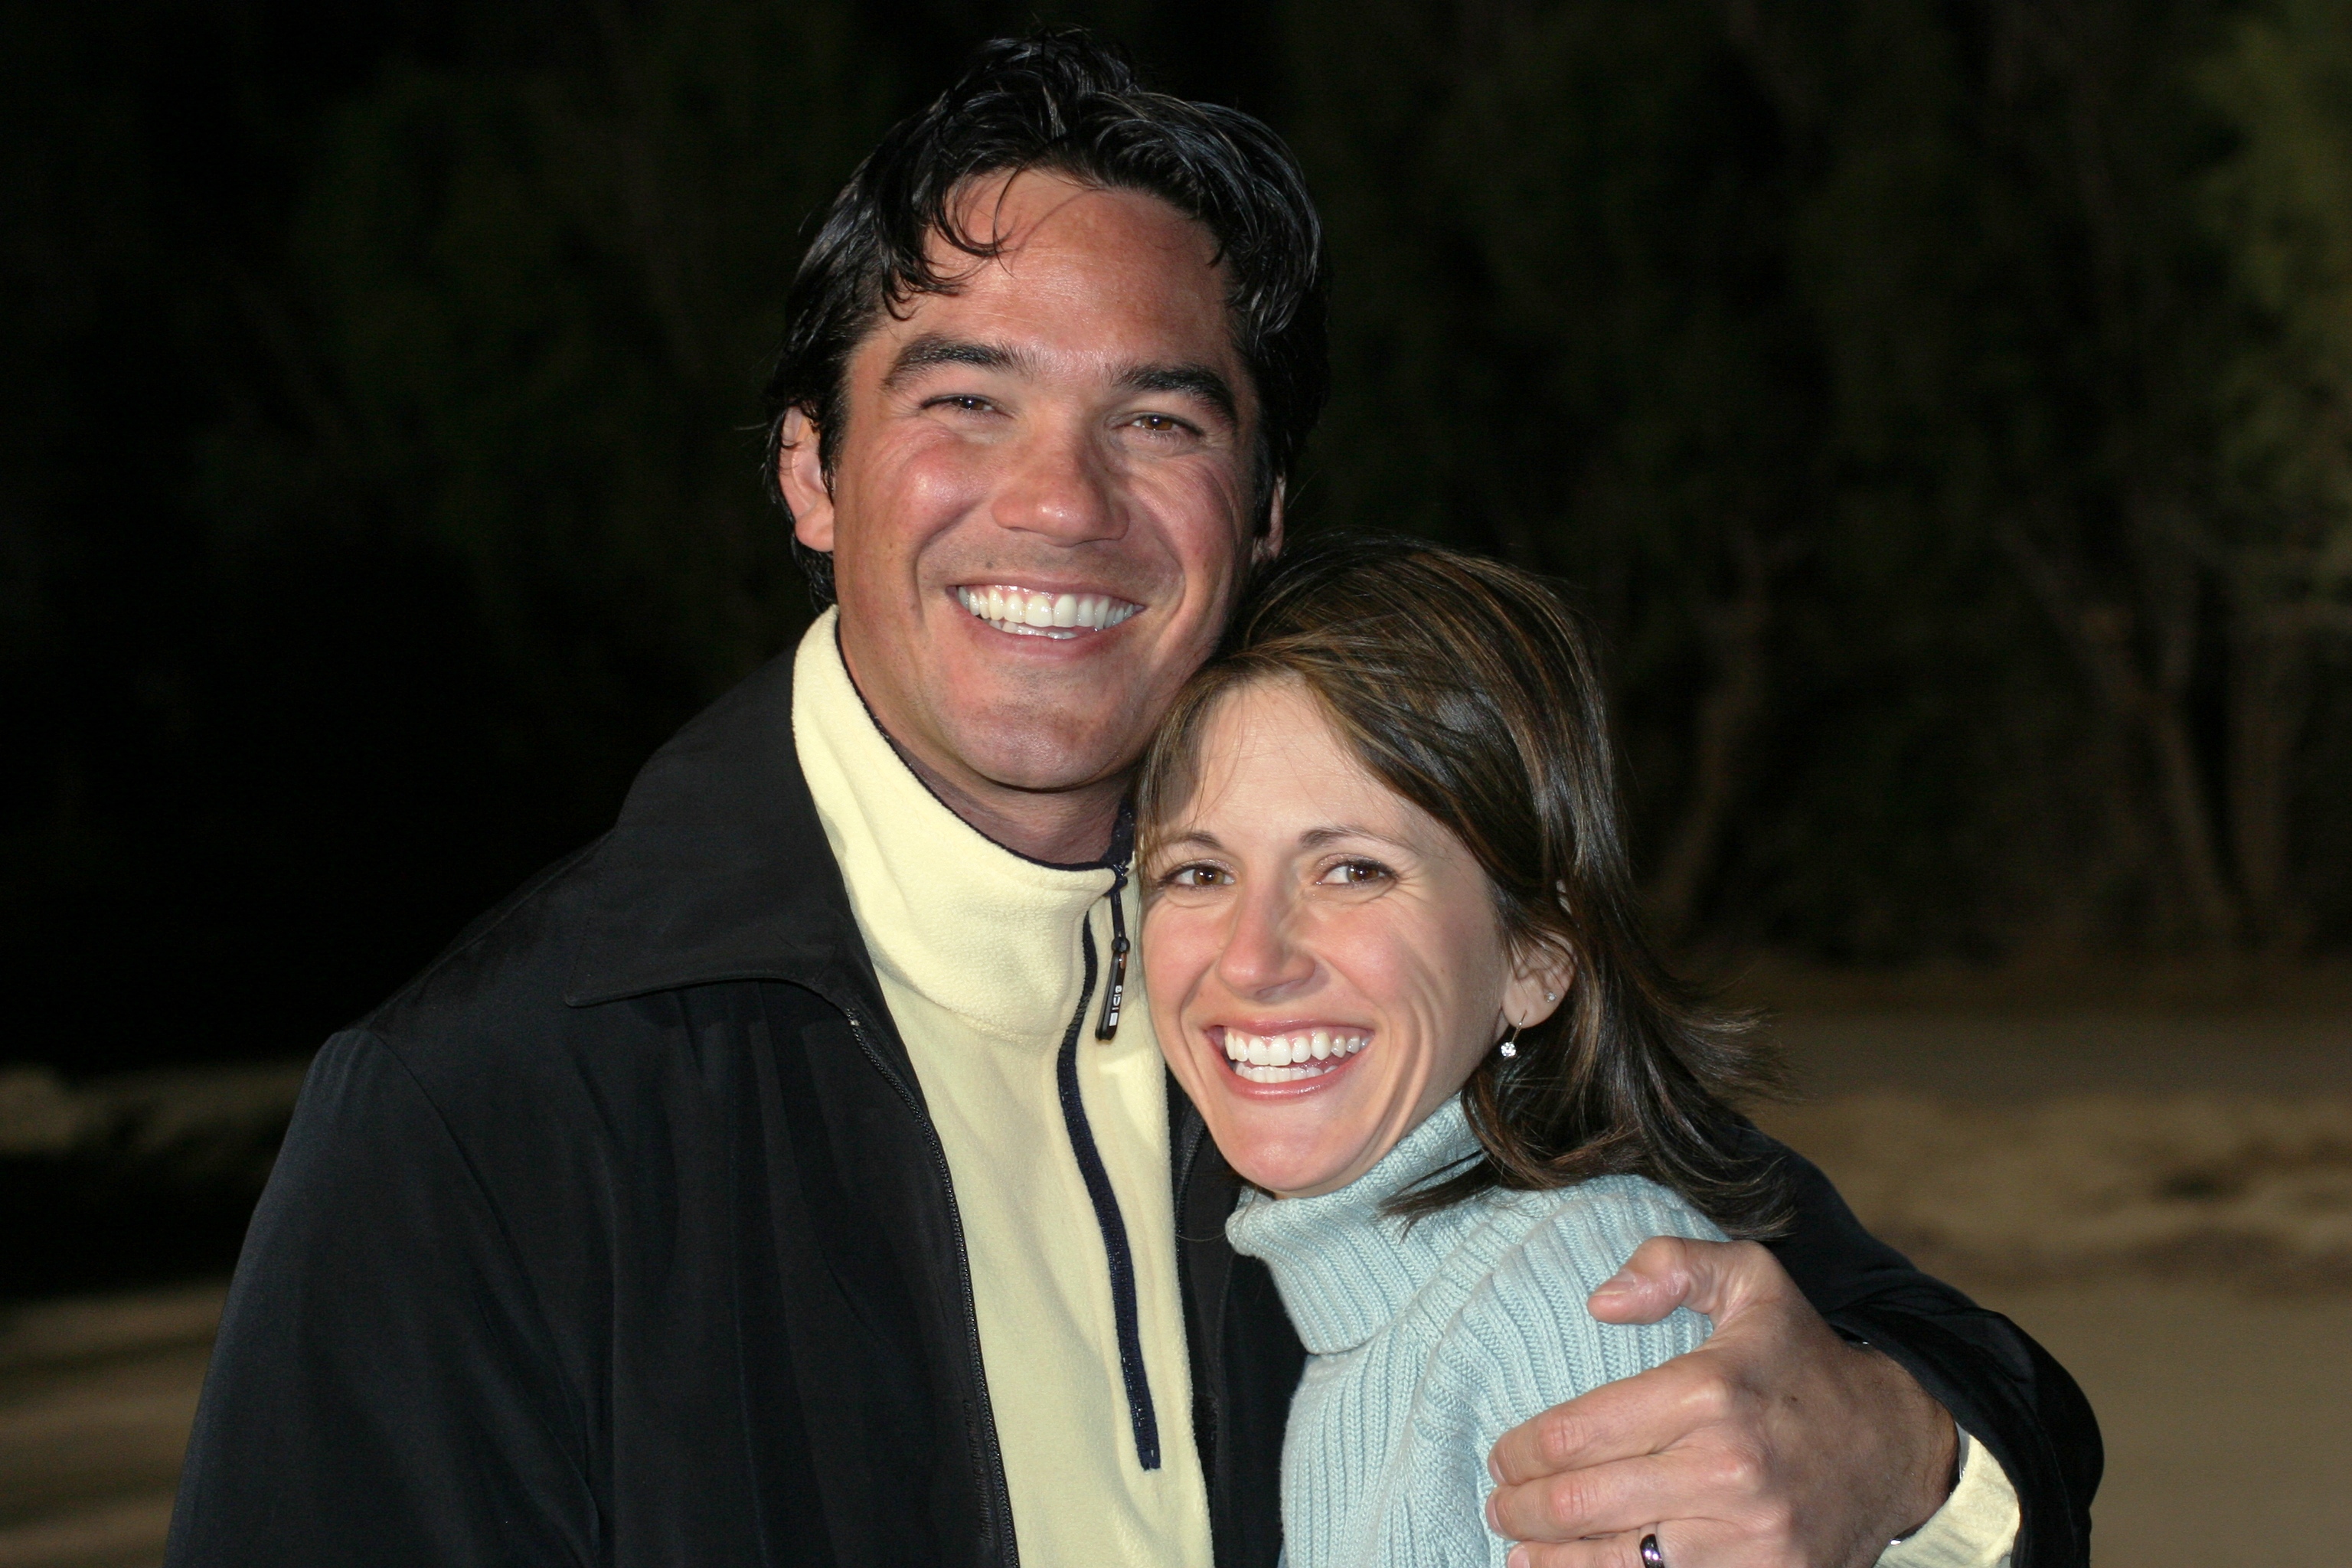 Dean Cain, Heather Hegeman on the set of the movie Lost